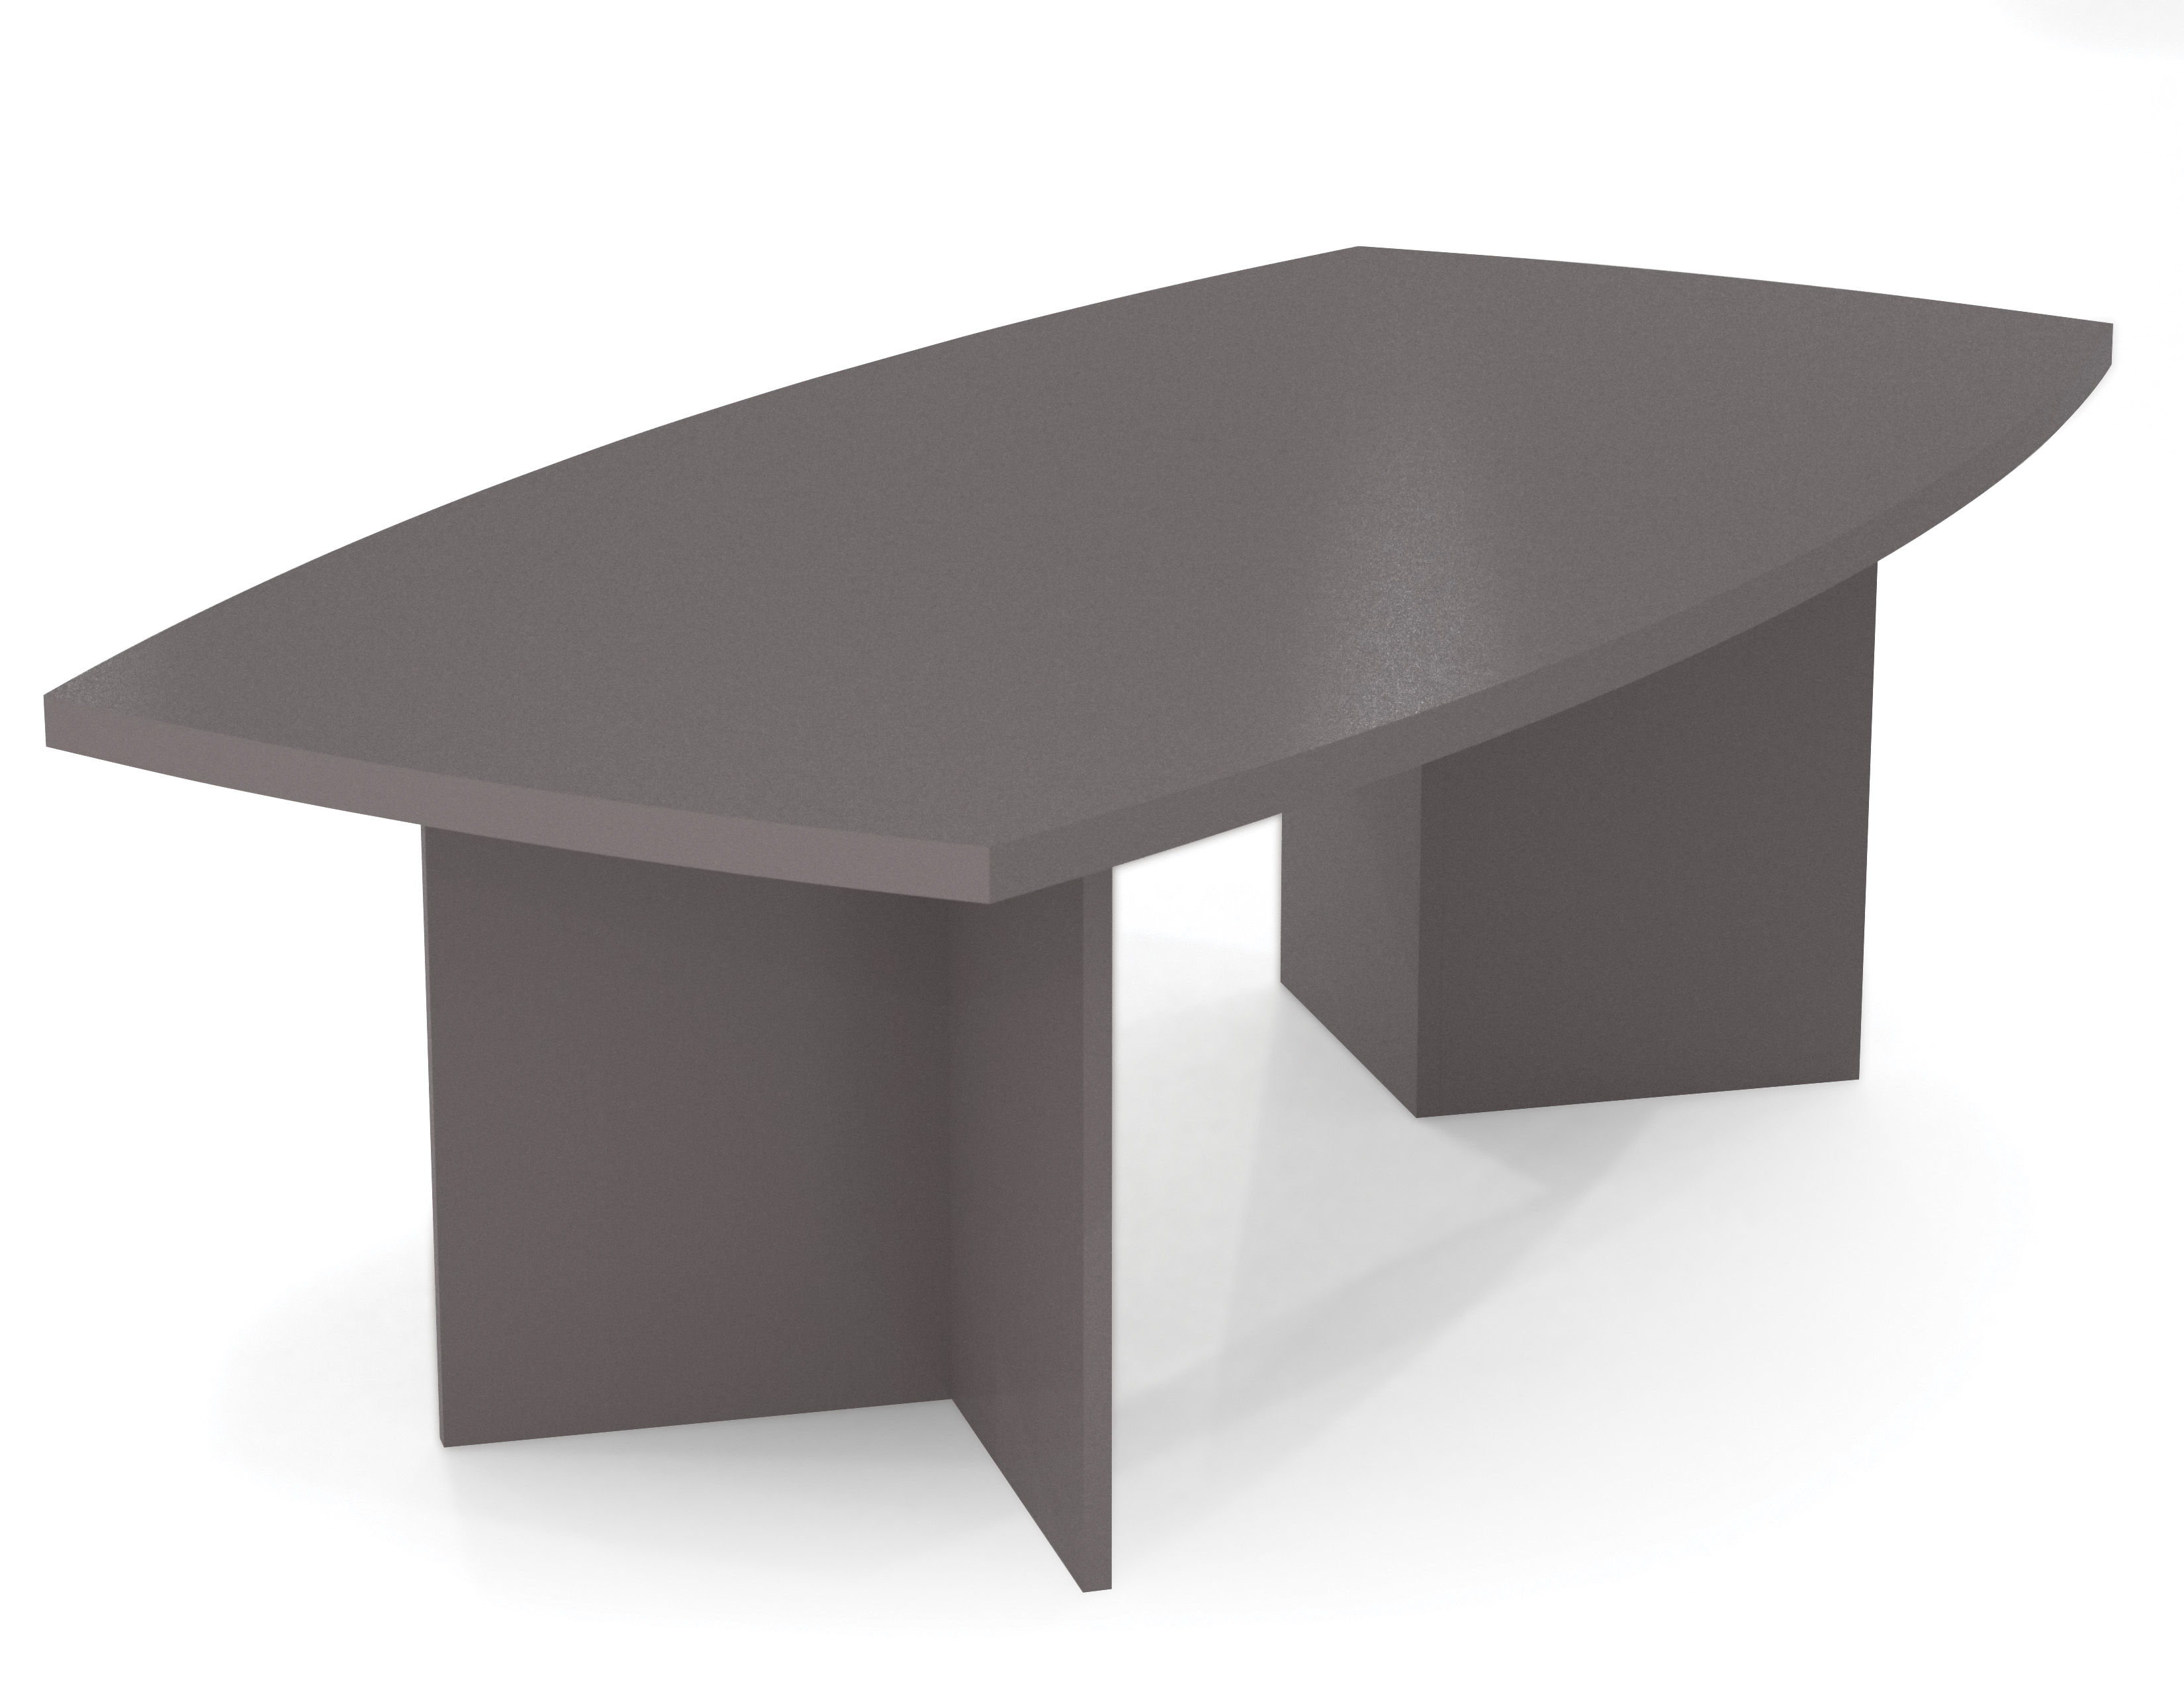 Bestar 65776-59 Bestar Boat Shaped Conference Table With 1 .75 In. Melamine Top In Slate